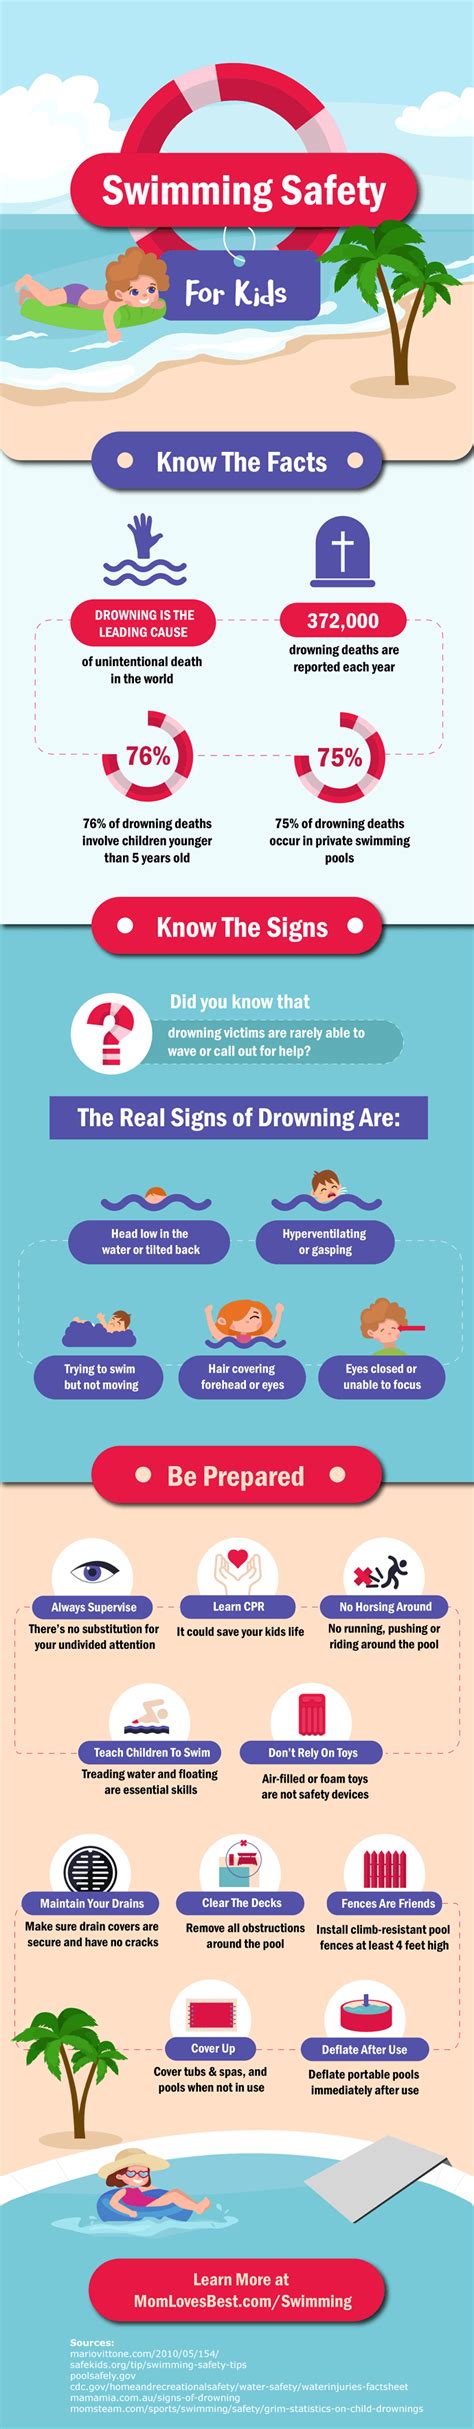 Drowning Prevention Tips And Videos Dry Drowning Secondary Drowning